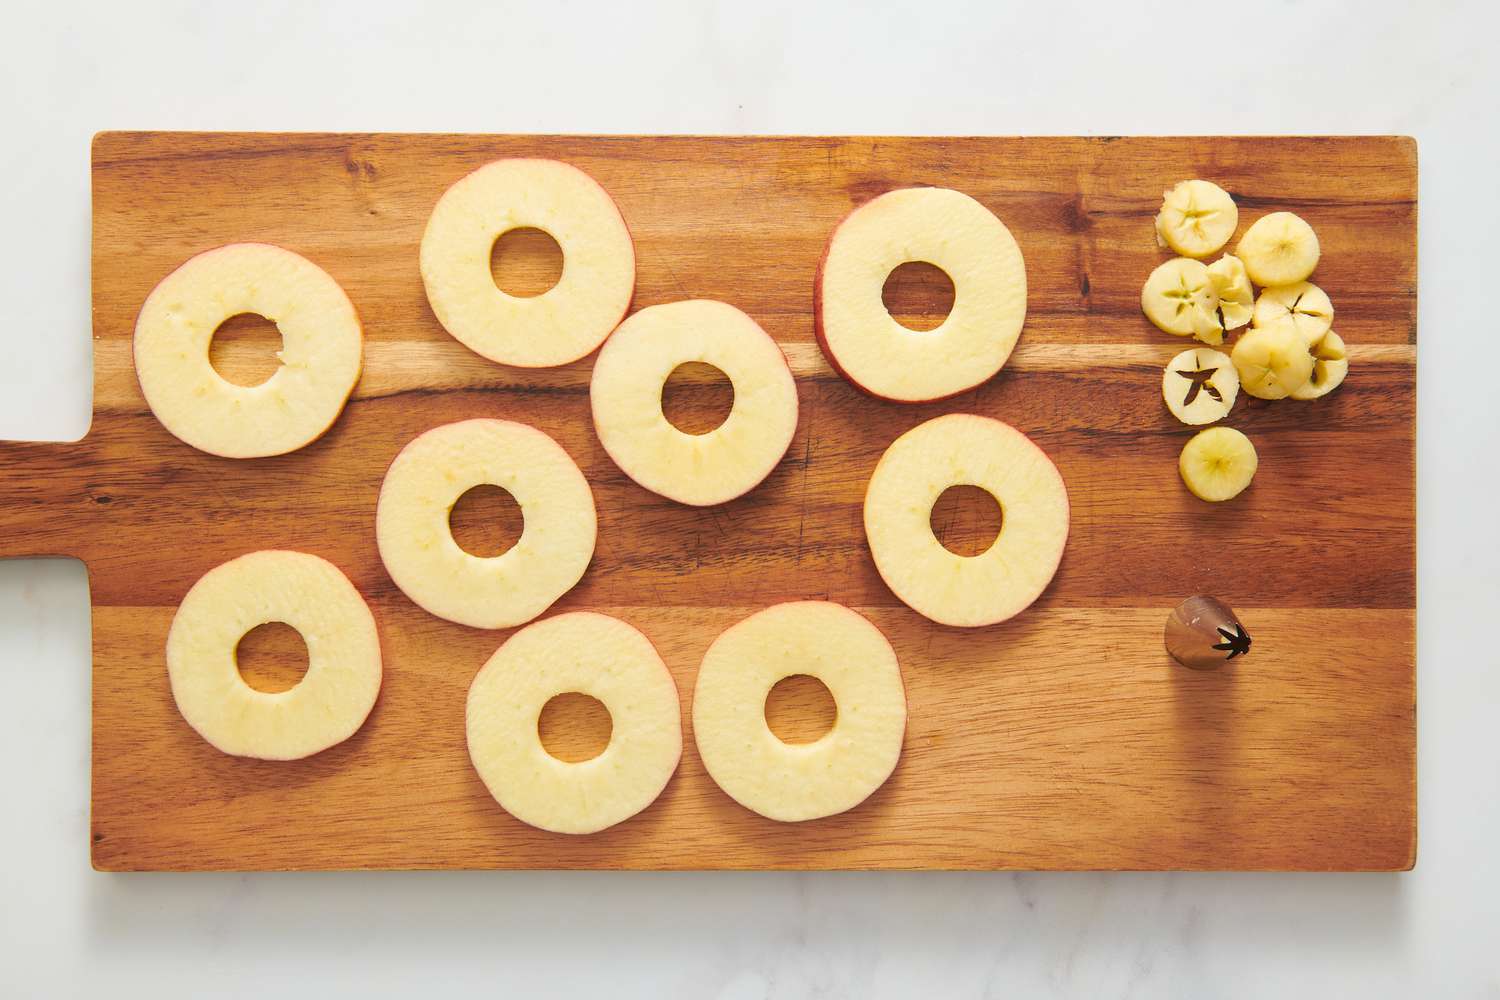 A cutting board with large, thin slices of apples with the core removed with a pipping tip